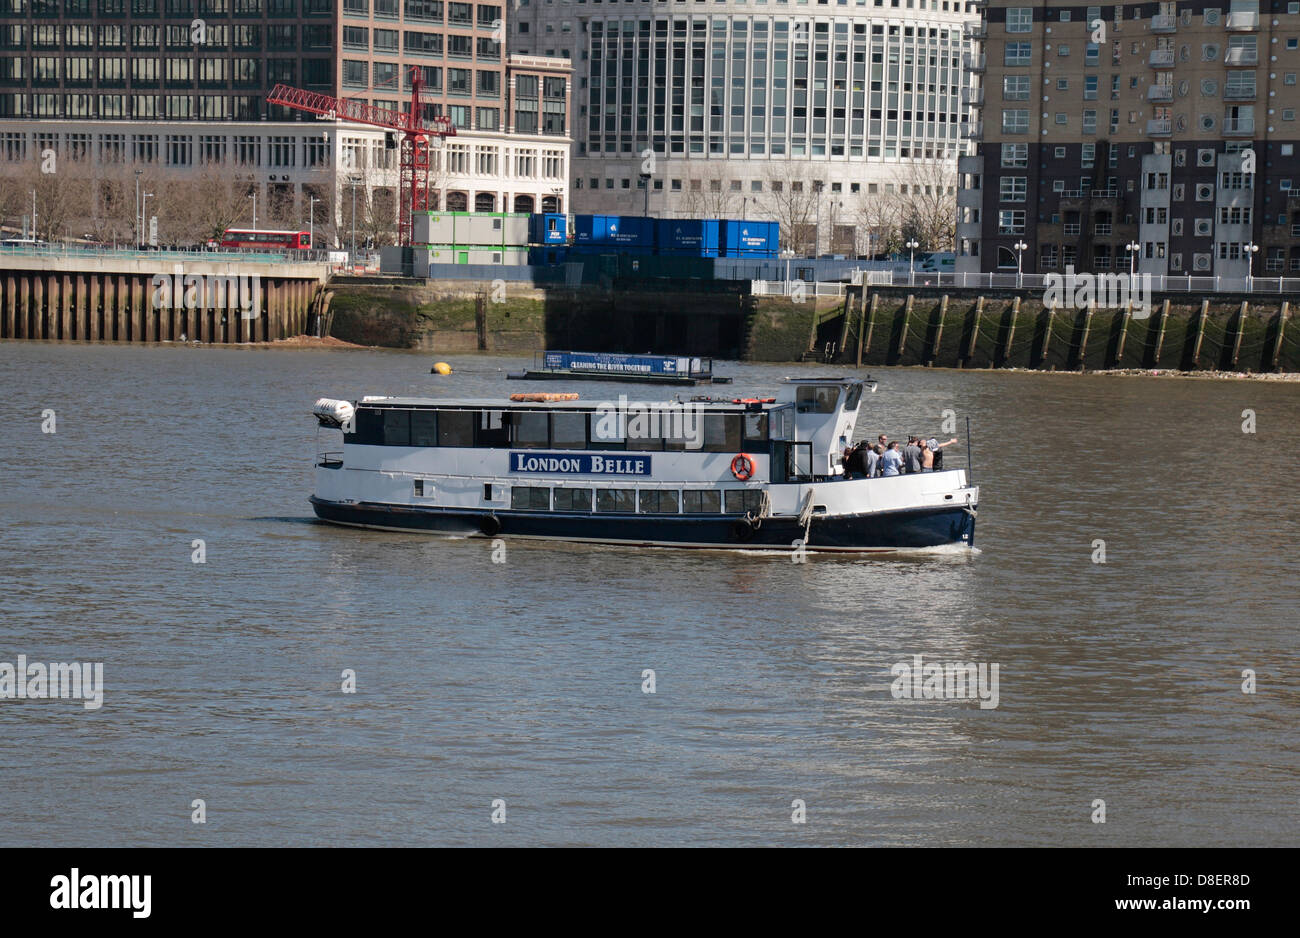 The MV 'London Belle' party hire barge sailing on the River Thames, London, UK. Stock Photo